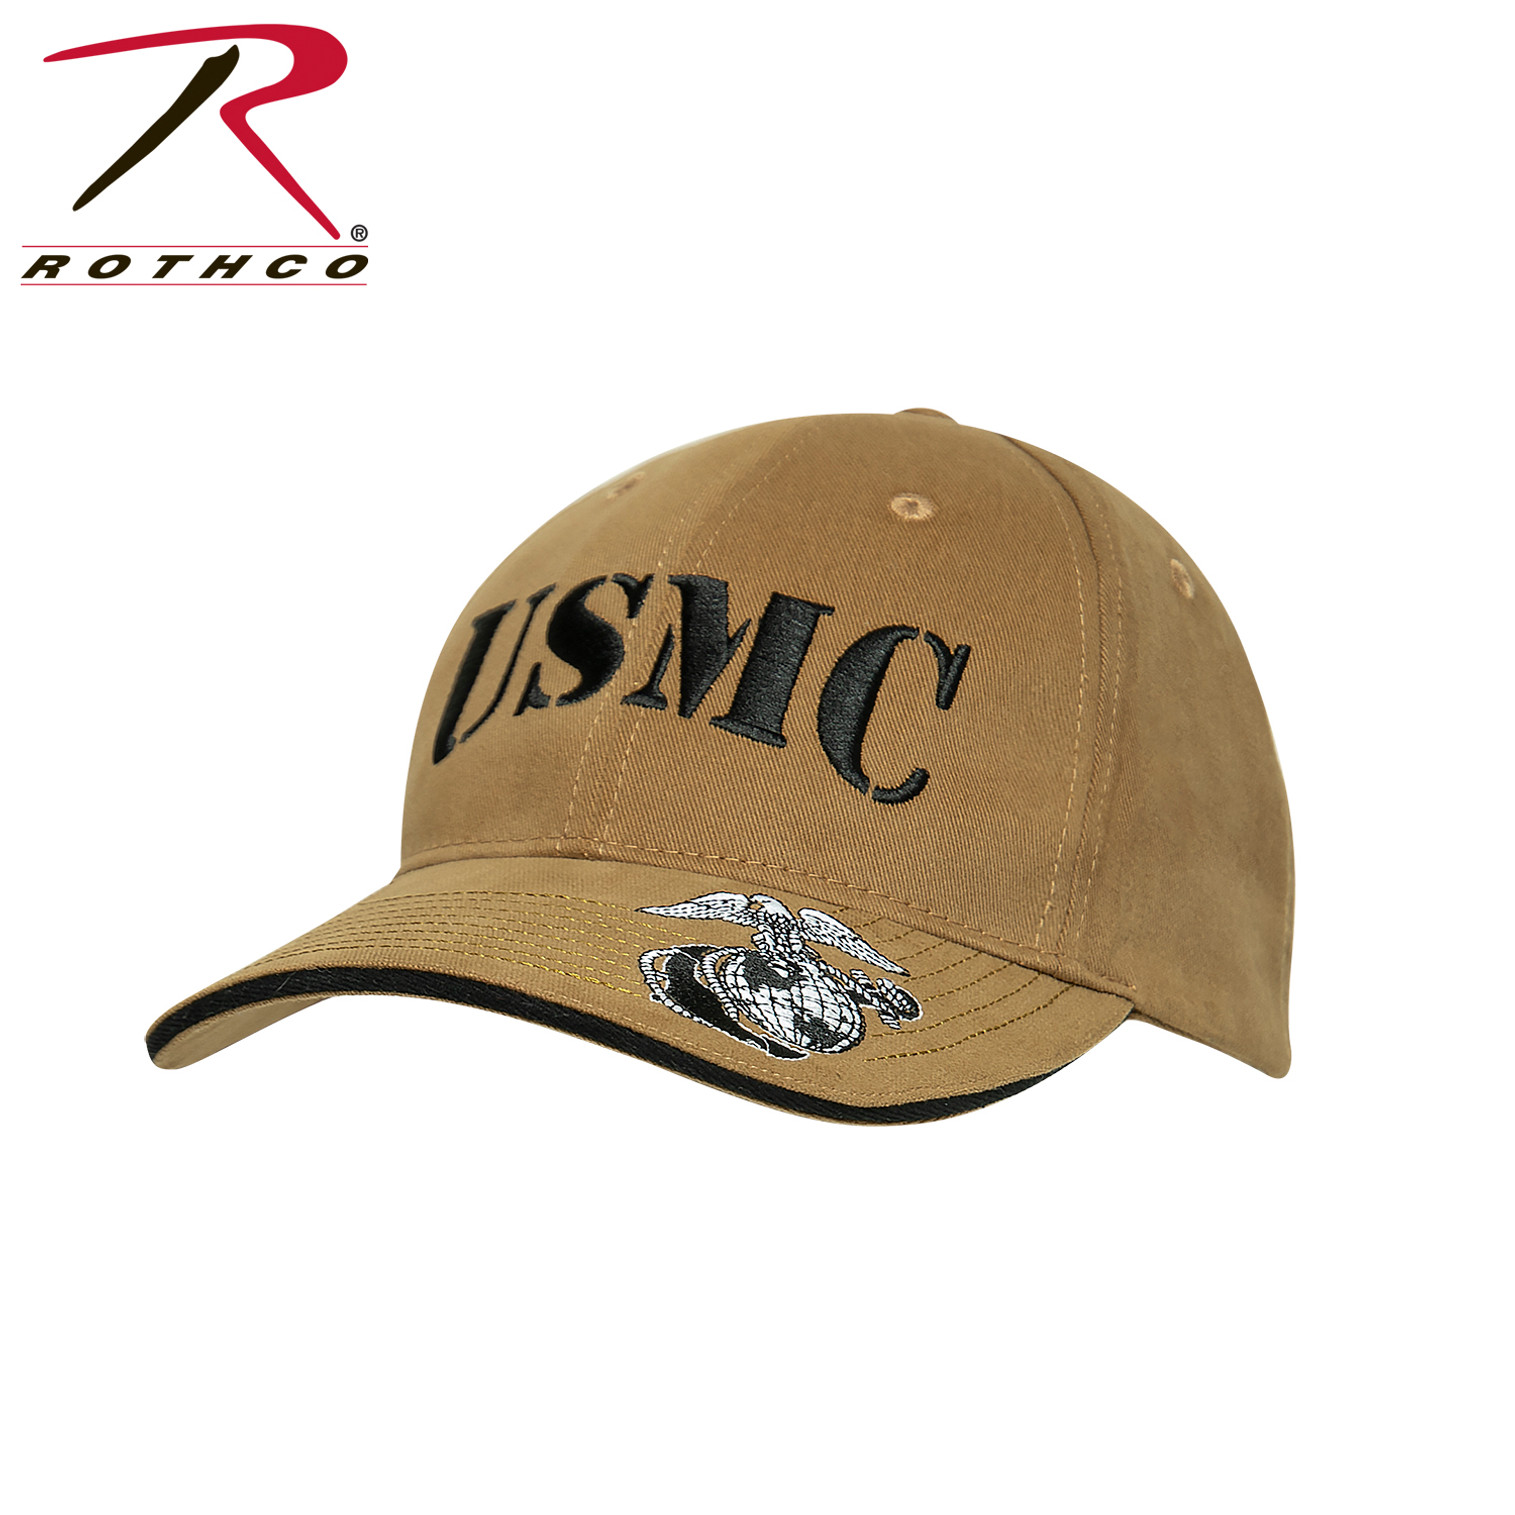 Rothco Deluxe Vintage USMC Embroidered Low Pro Cap - Coyote Brown